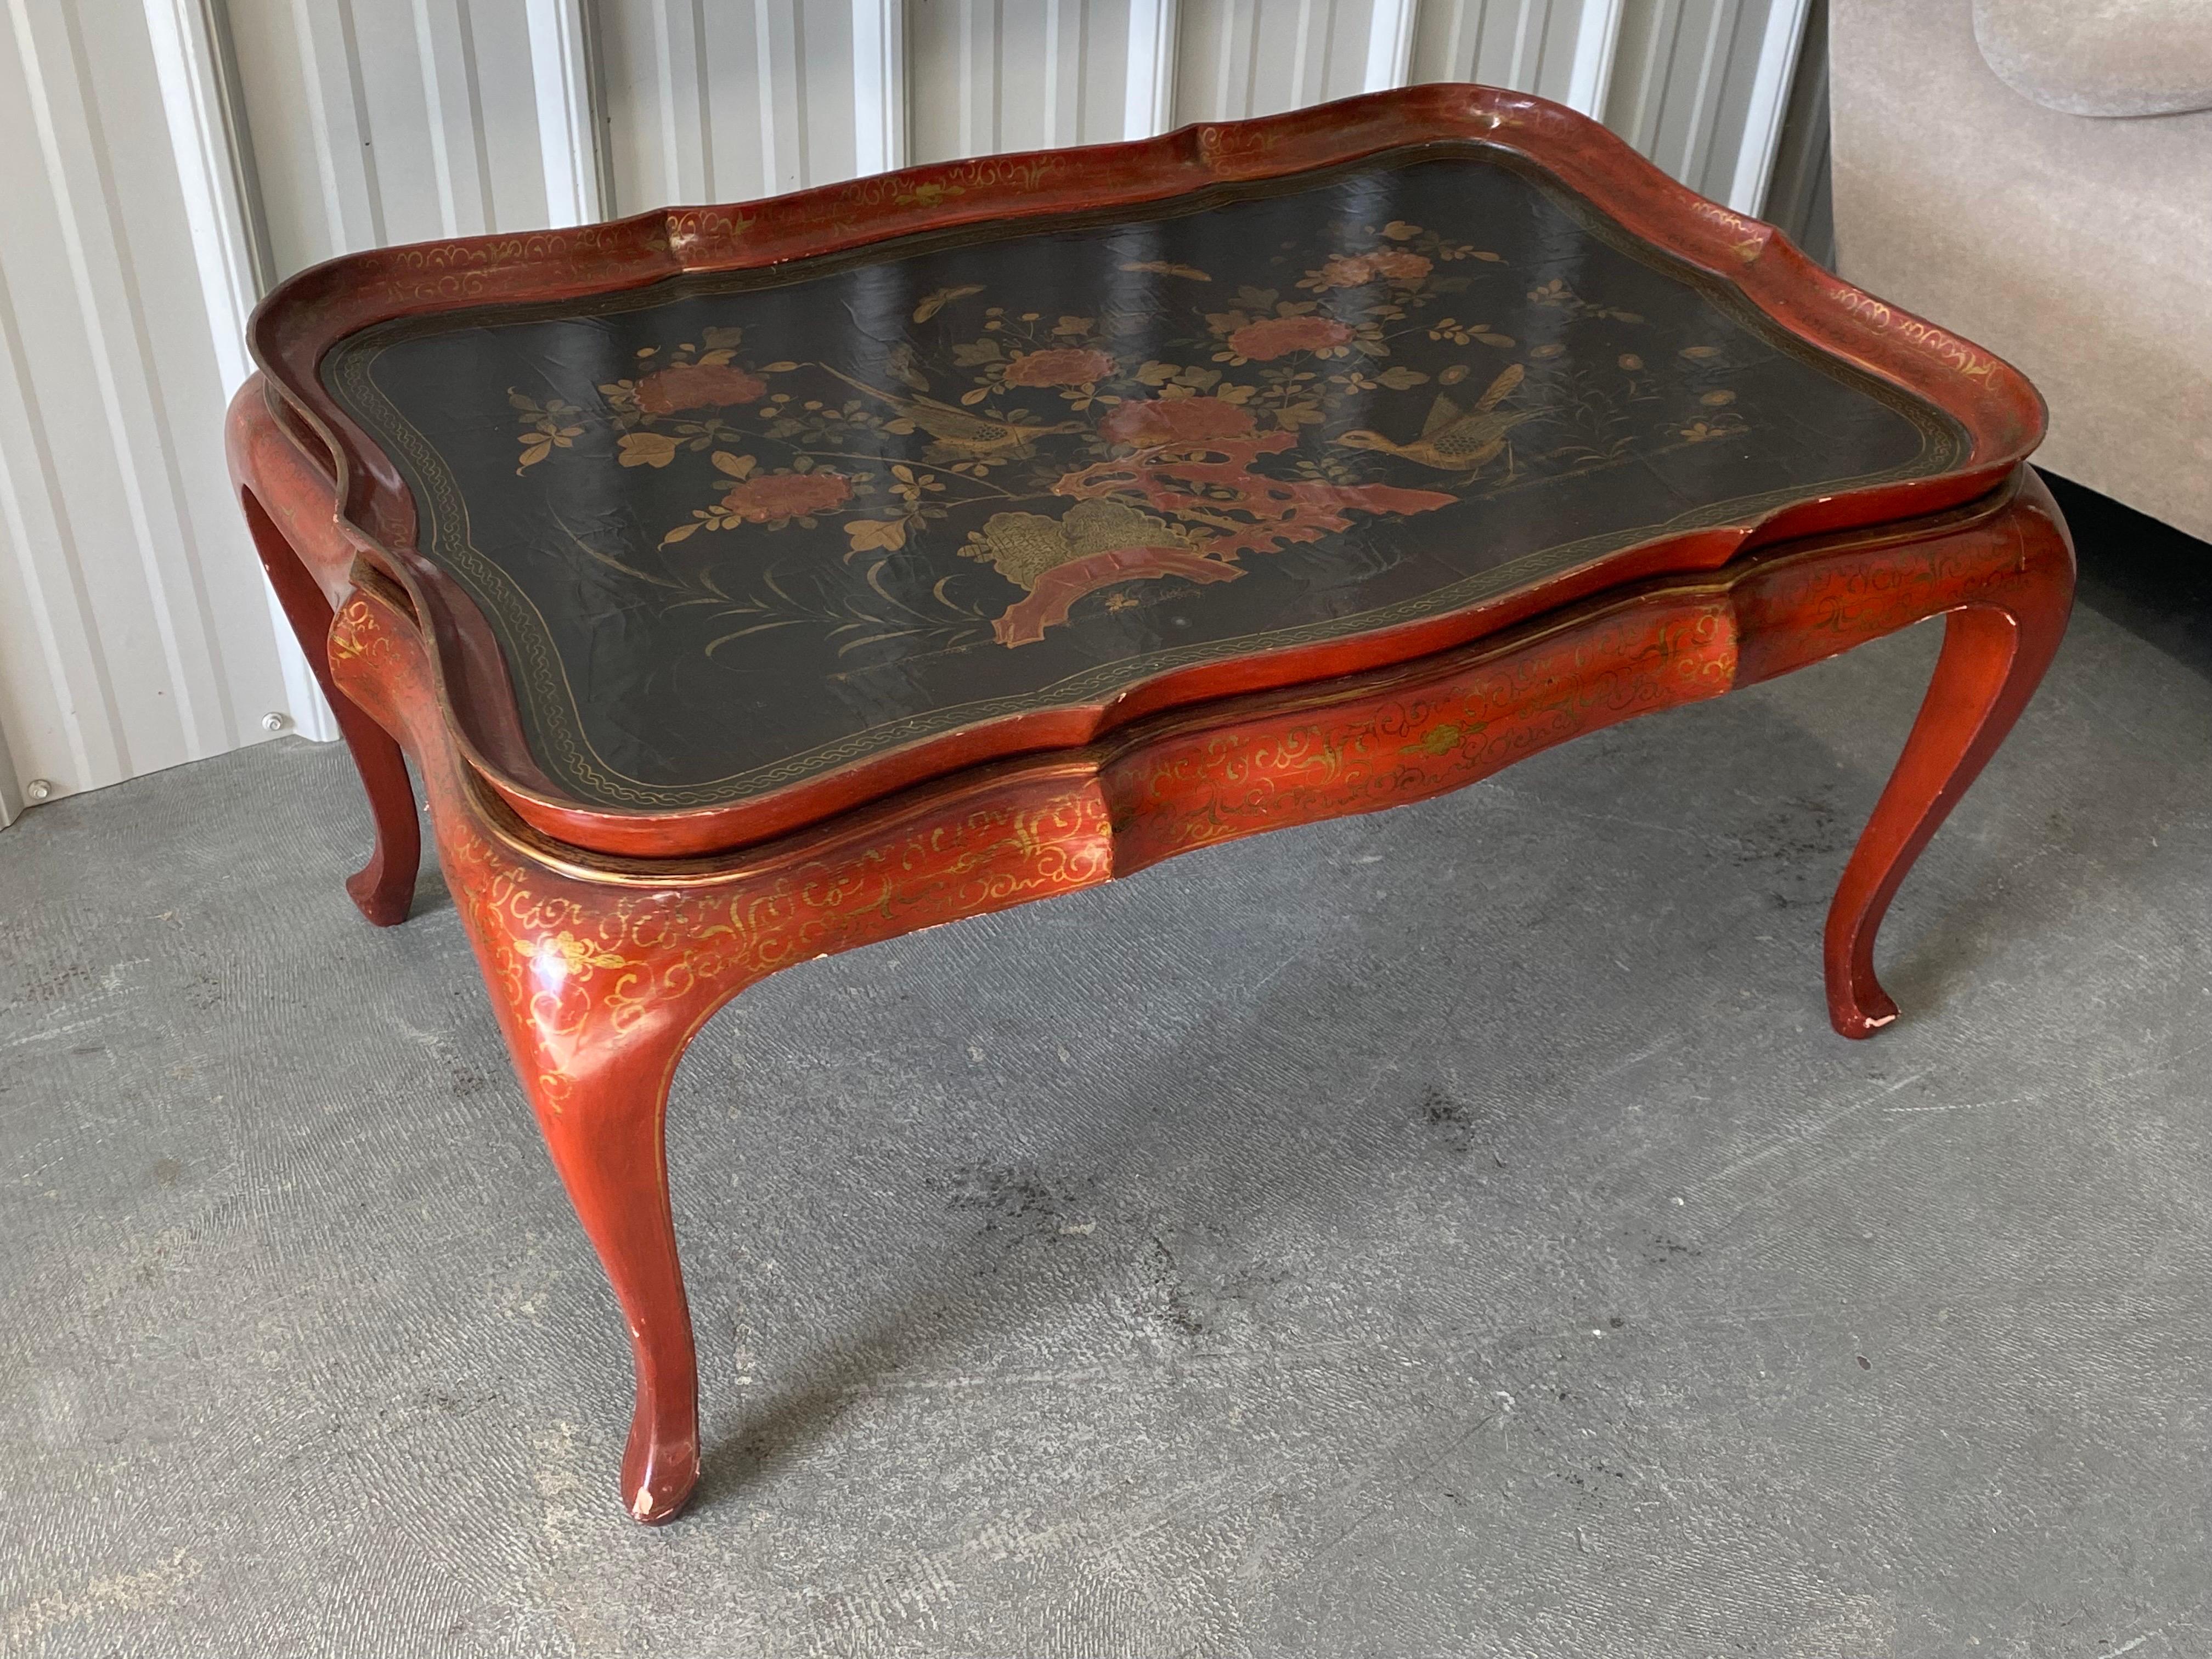 English 19th Century Lacquer Tray on Later Stand. A beautiful hand lacquered and painted tray in black and deep red. Tray is period. Wooden stand made later.
Sourced by David Easton for a Private Manhattan Collection.
Good overall condition. Light